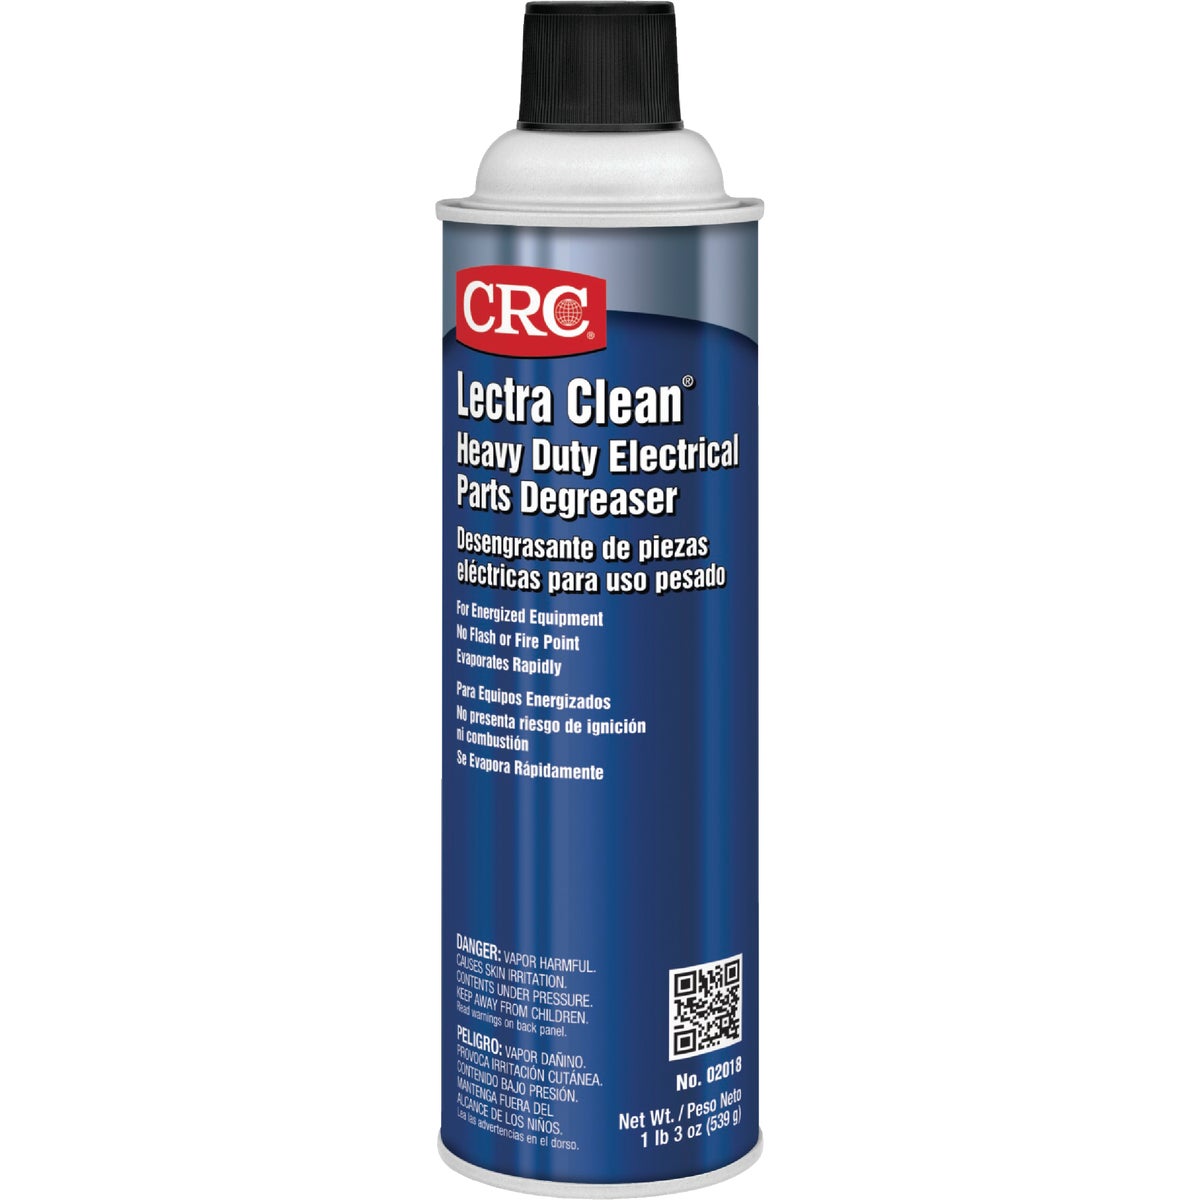 Item 588717, Lectra Clean is extremely effective for cleaning and degreasing dirty, 